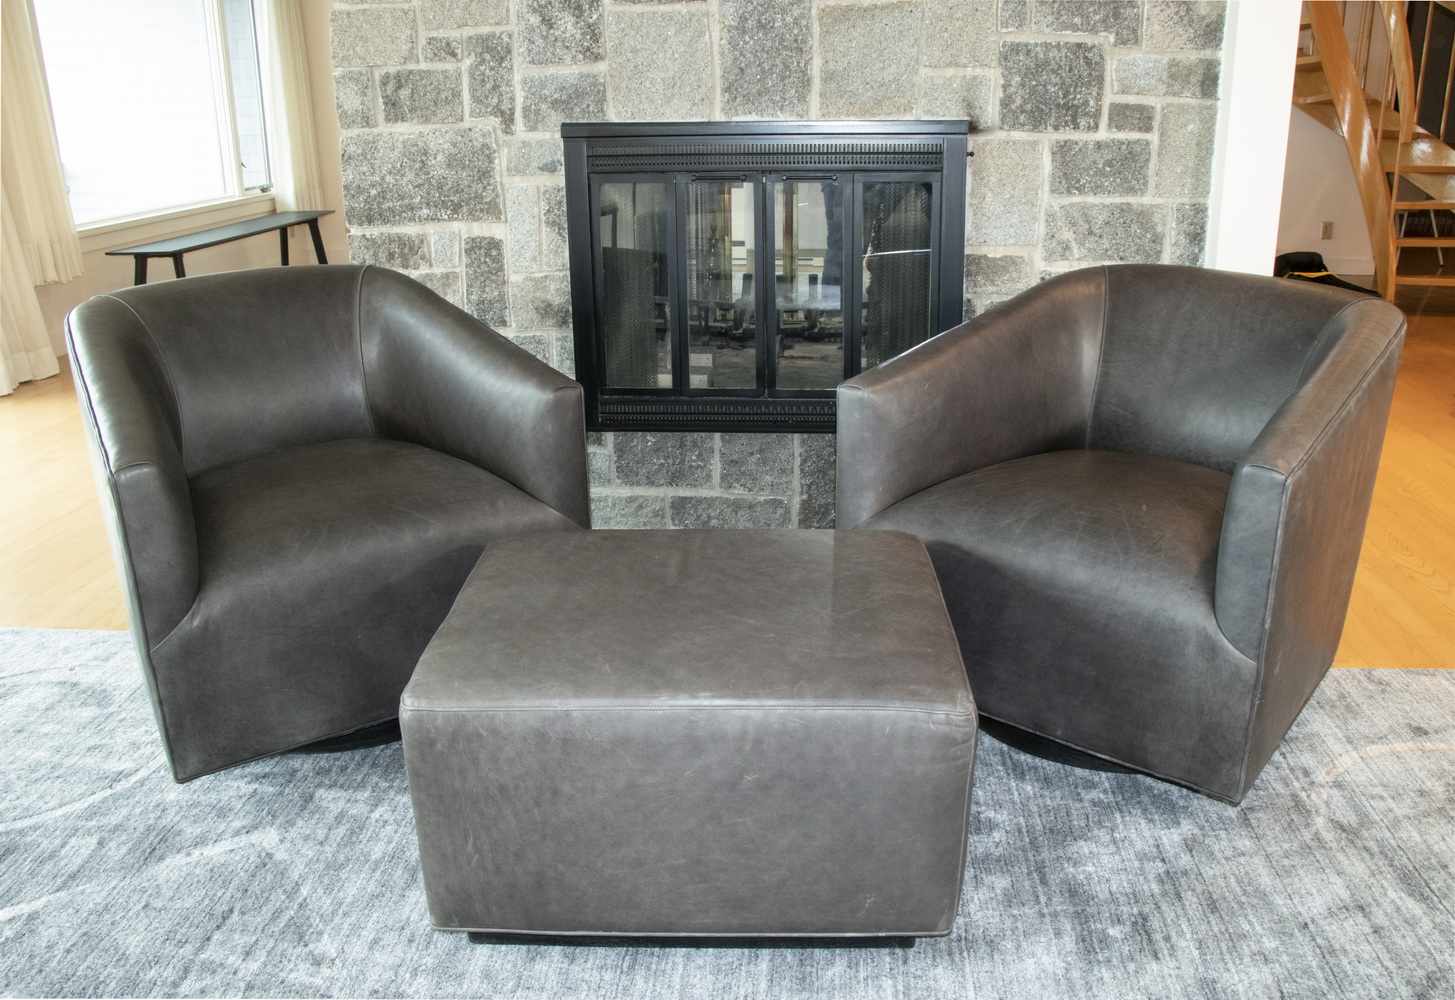 PR OF BLACK LEATHER ARMCHAIRS WITH 2b3e36